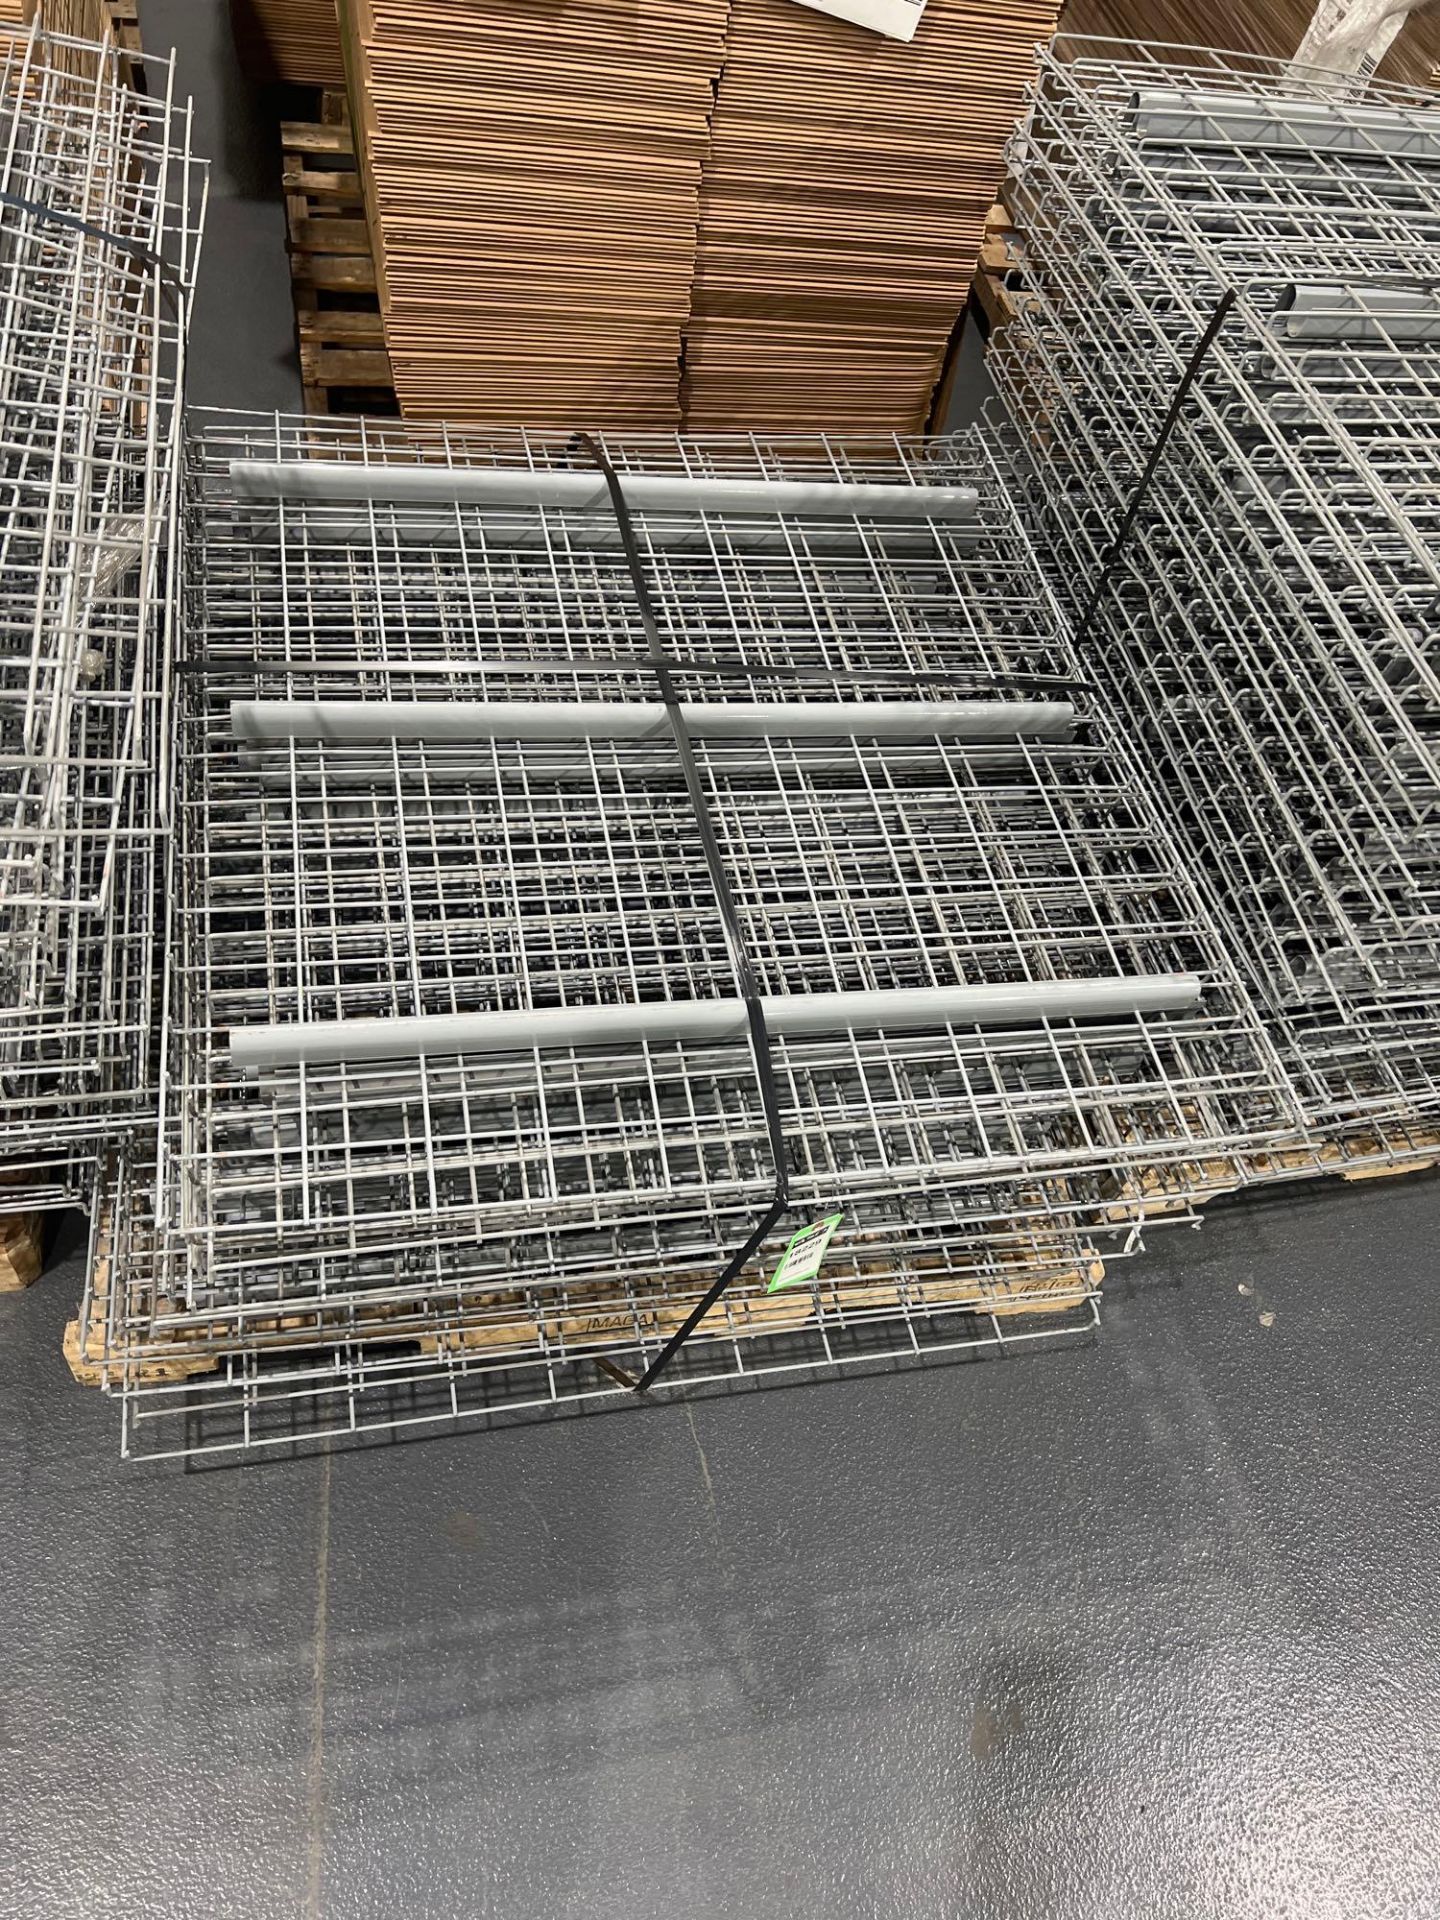 PALLET OF APPROX. 17 WIRE GRATES FOR PALLET RACKING, APPROX. DIMENSIONS 43" X 45" - Image 3 of 3